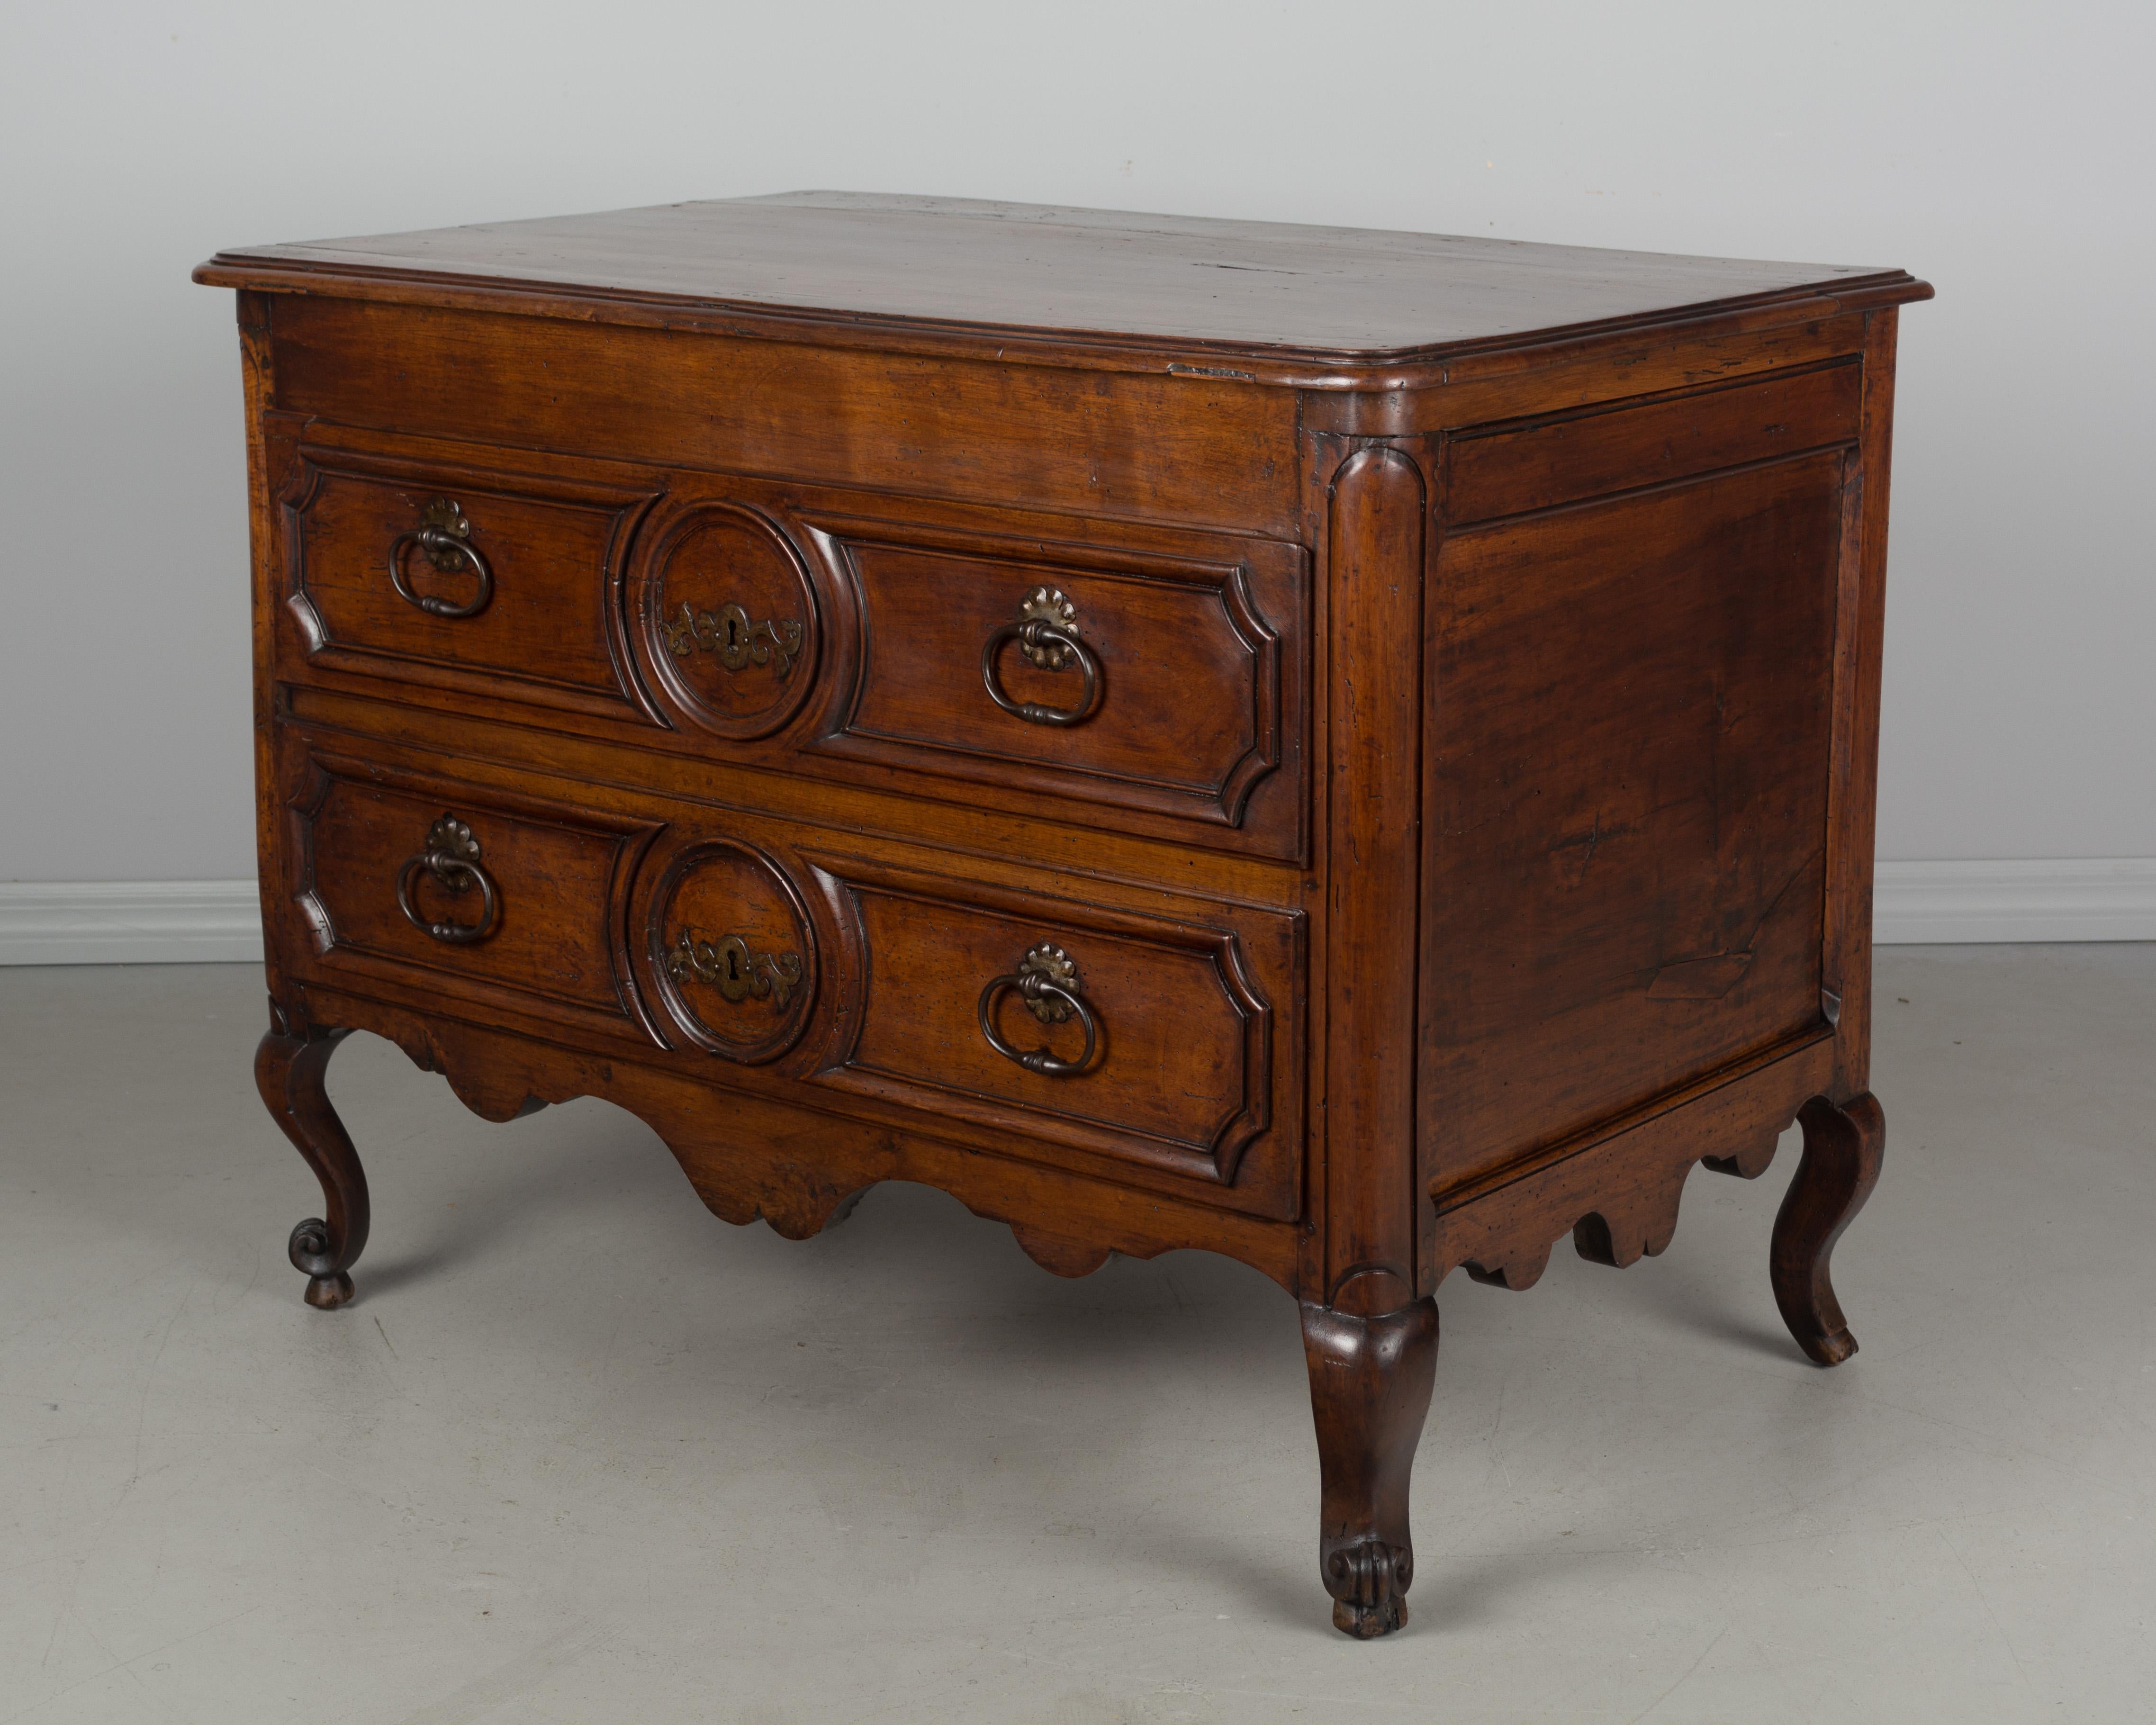 A Louis XV style French commode, or chest of drawers, made of solid hand carved walnut and finished on all four sides. Beautiful quality to the wood with a waxed patina. This chest was converted from a blanket chest in the 19th century. Two